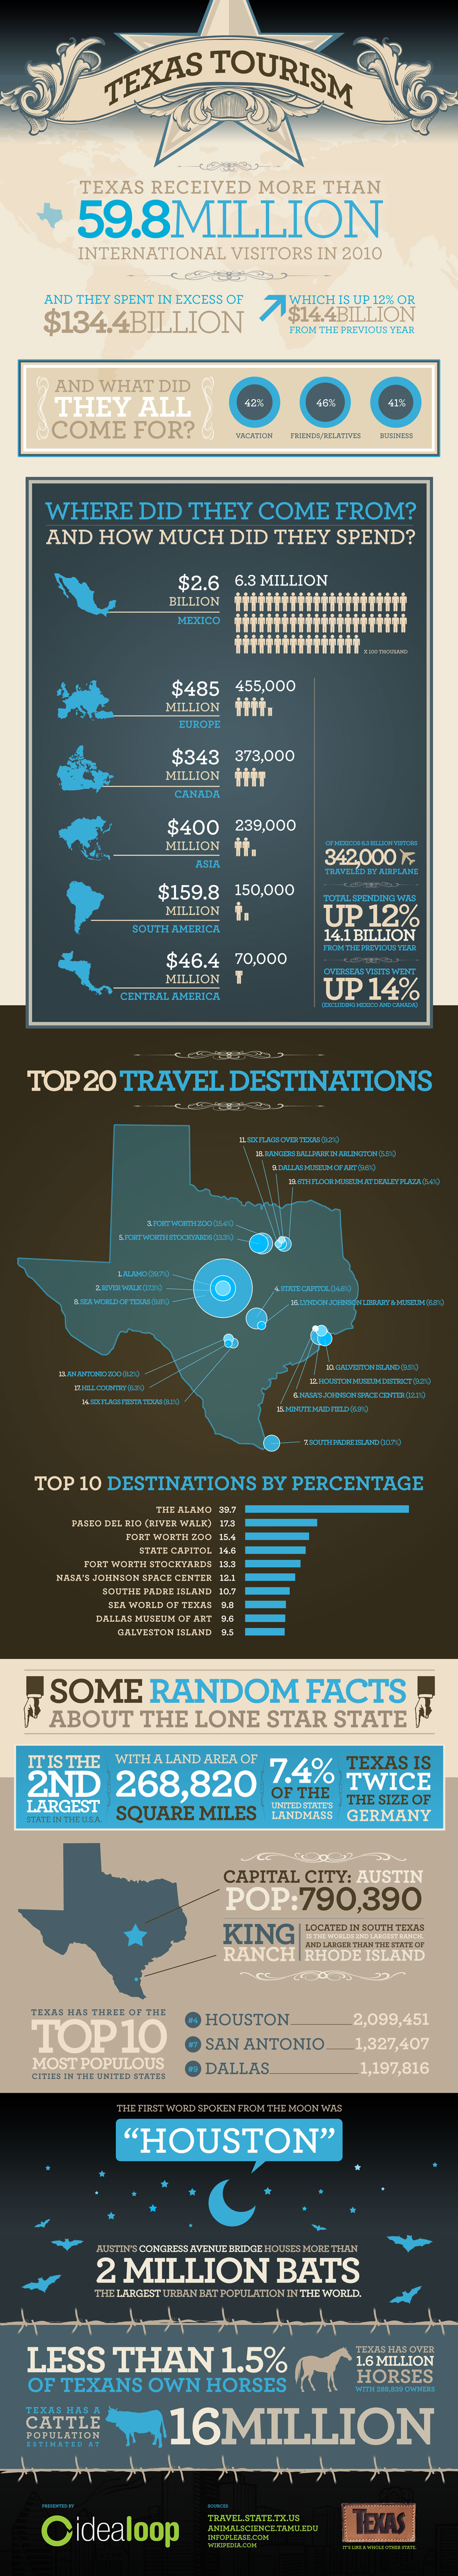 Texas Tourism in 2010